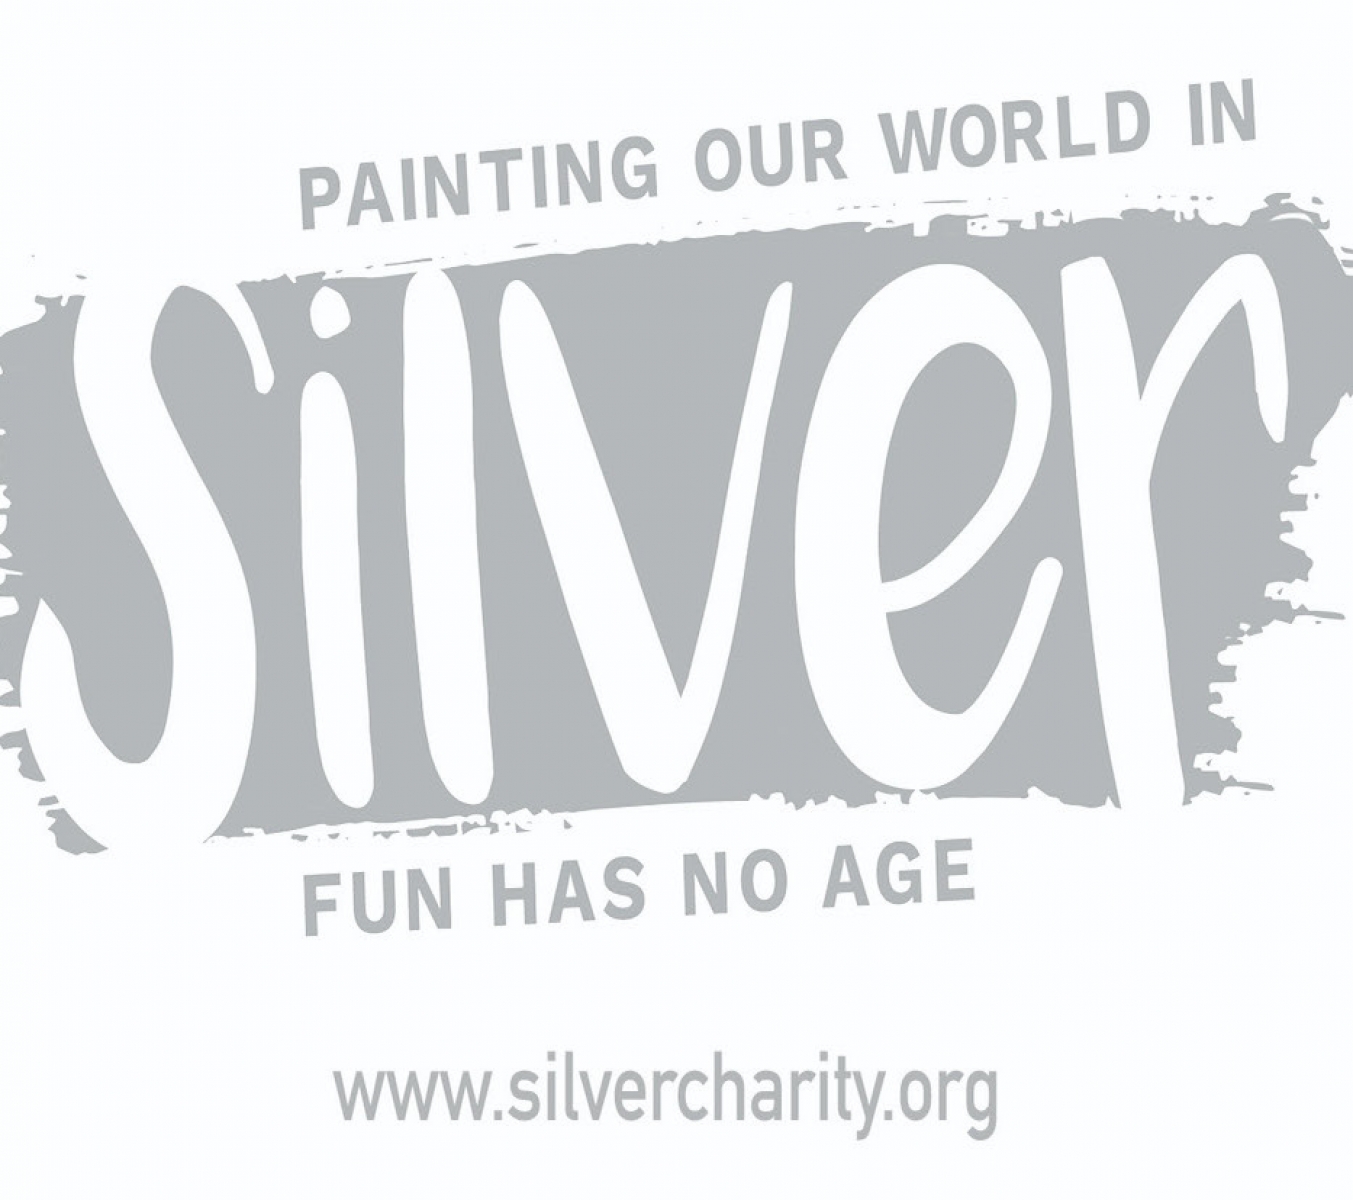 Painting Our World in Silver eCards